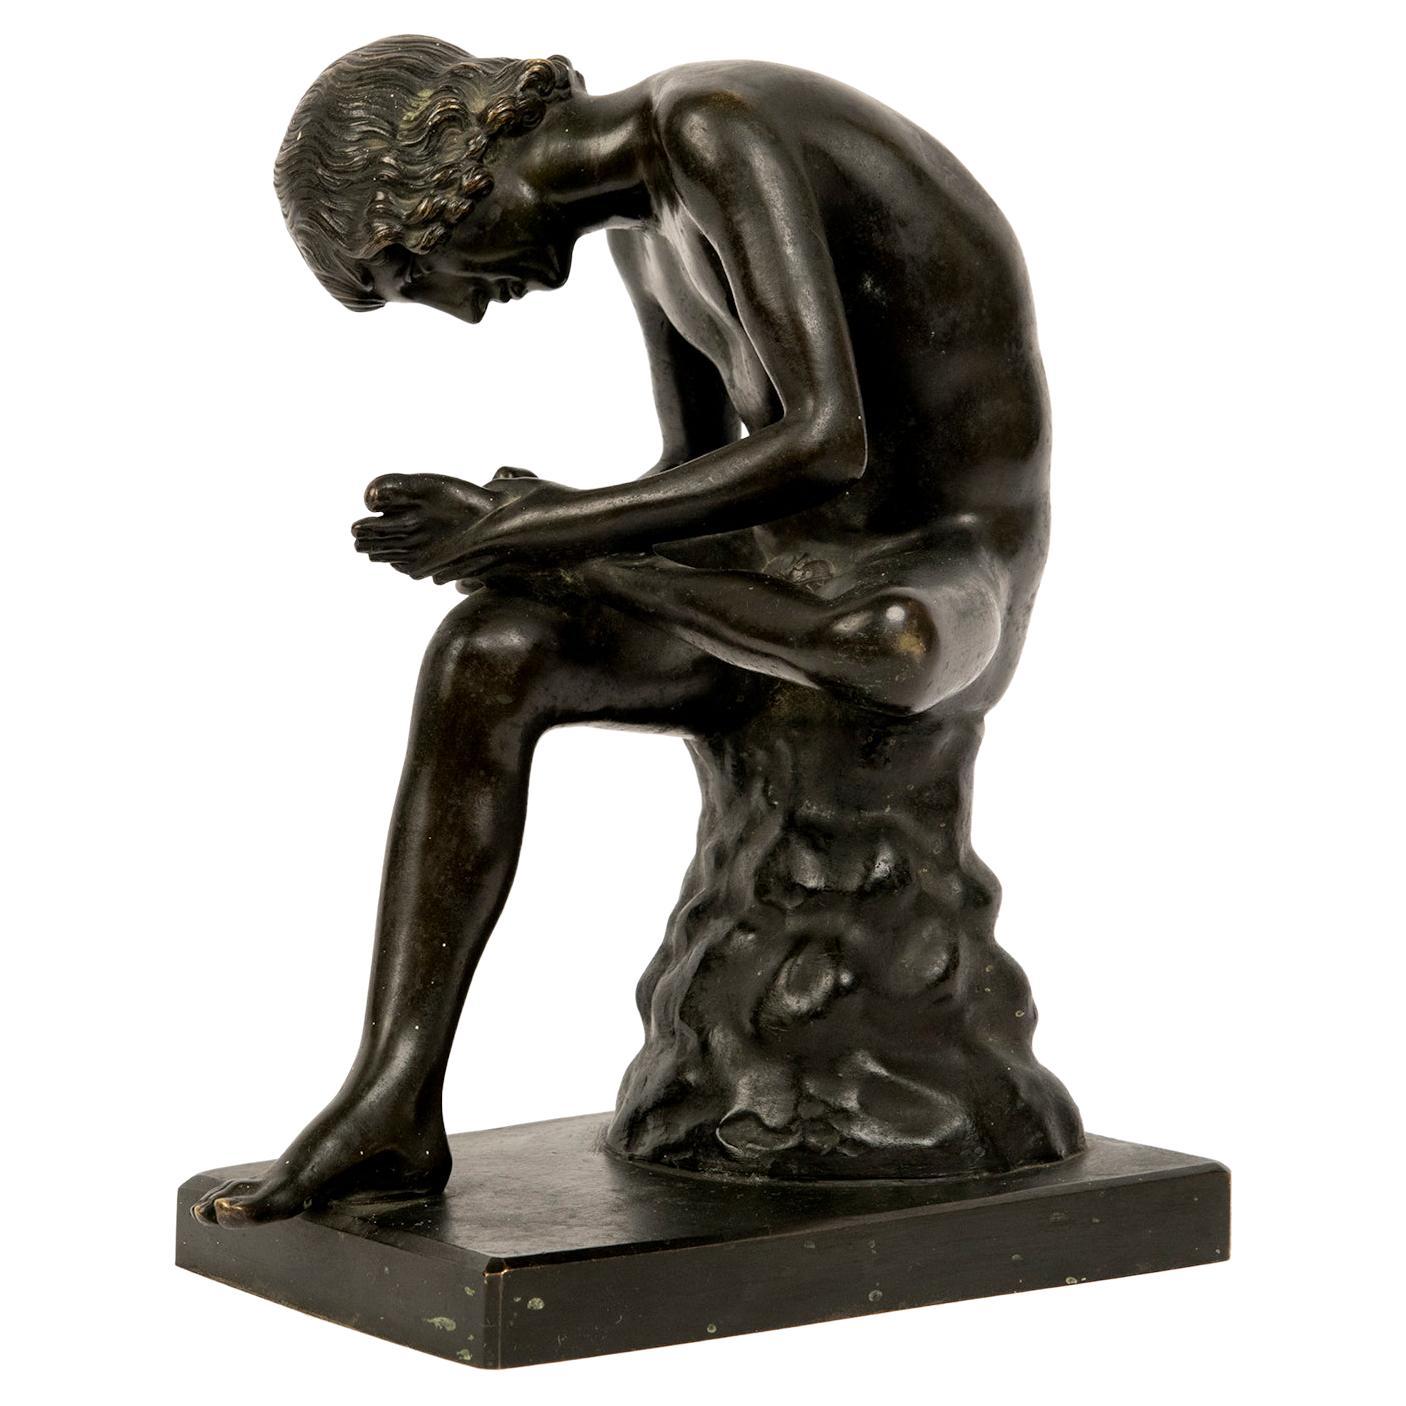 Grand Tour “Boy with Thorn” or Spinario Bronze Sculpture